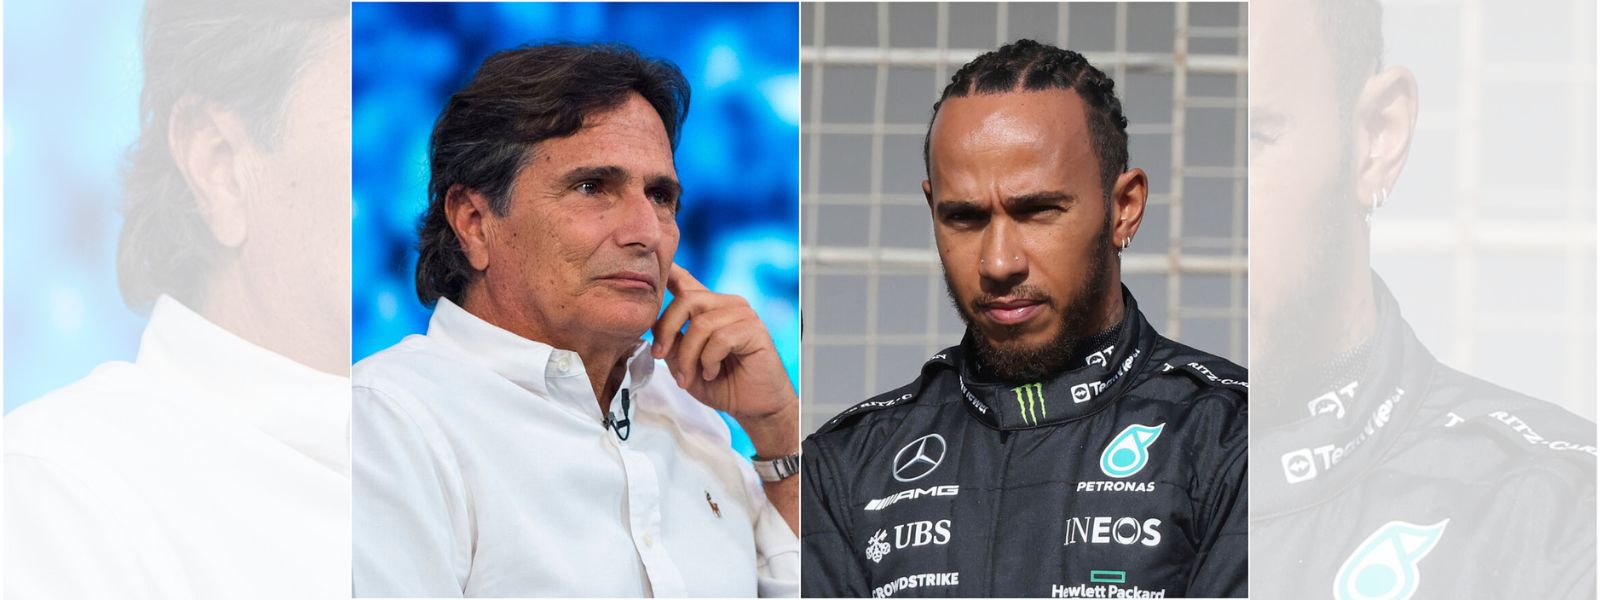 F1 champ Nelson Piquet fined $1 million for homophobic, racist insults on 7-time F1 champ Lewis Hamilton